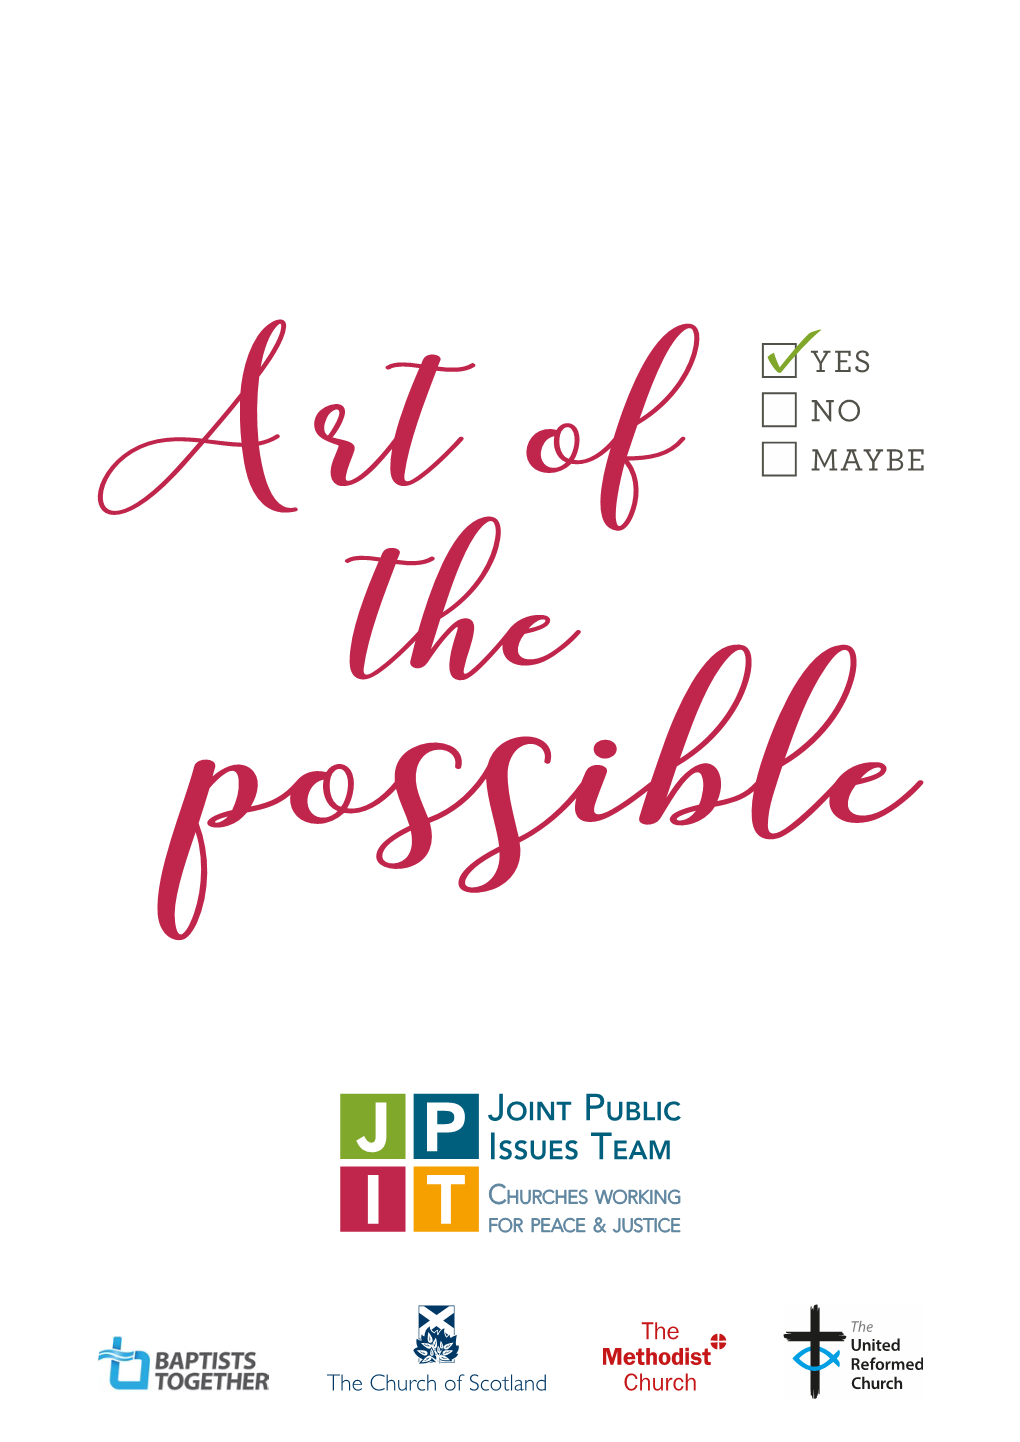 Download the Art of the Possible